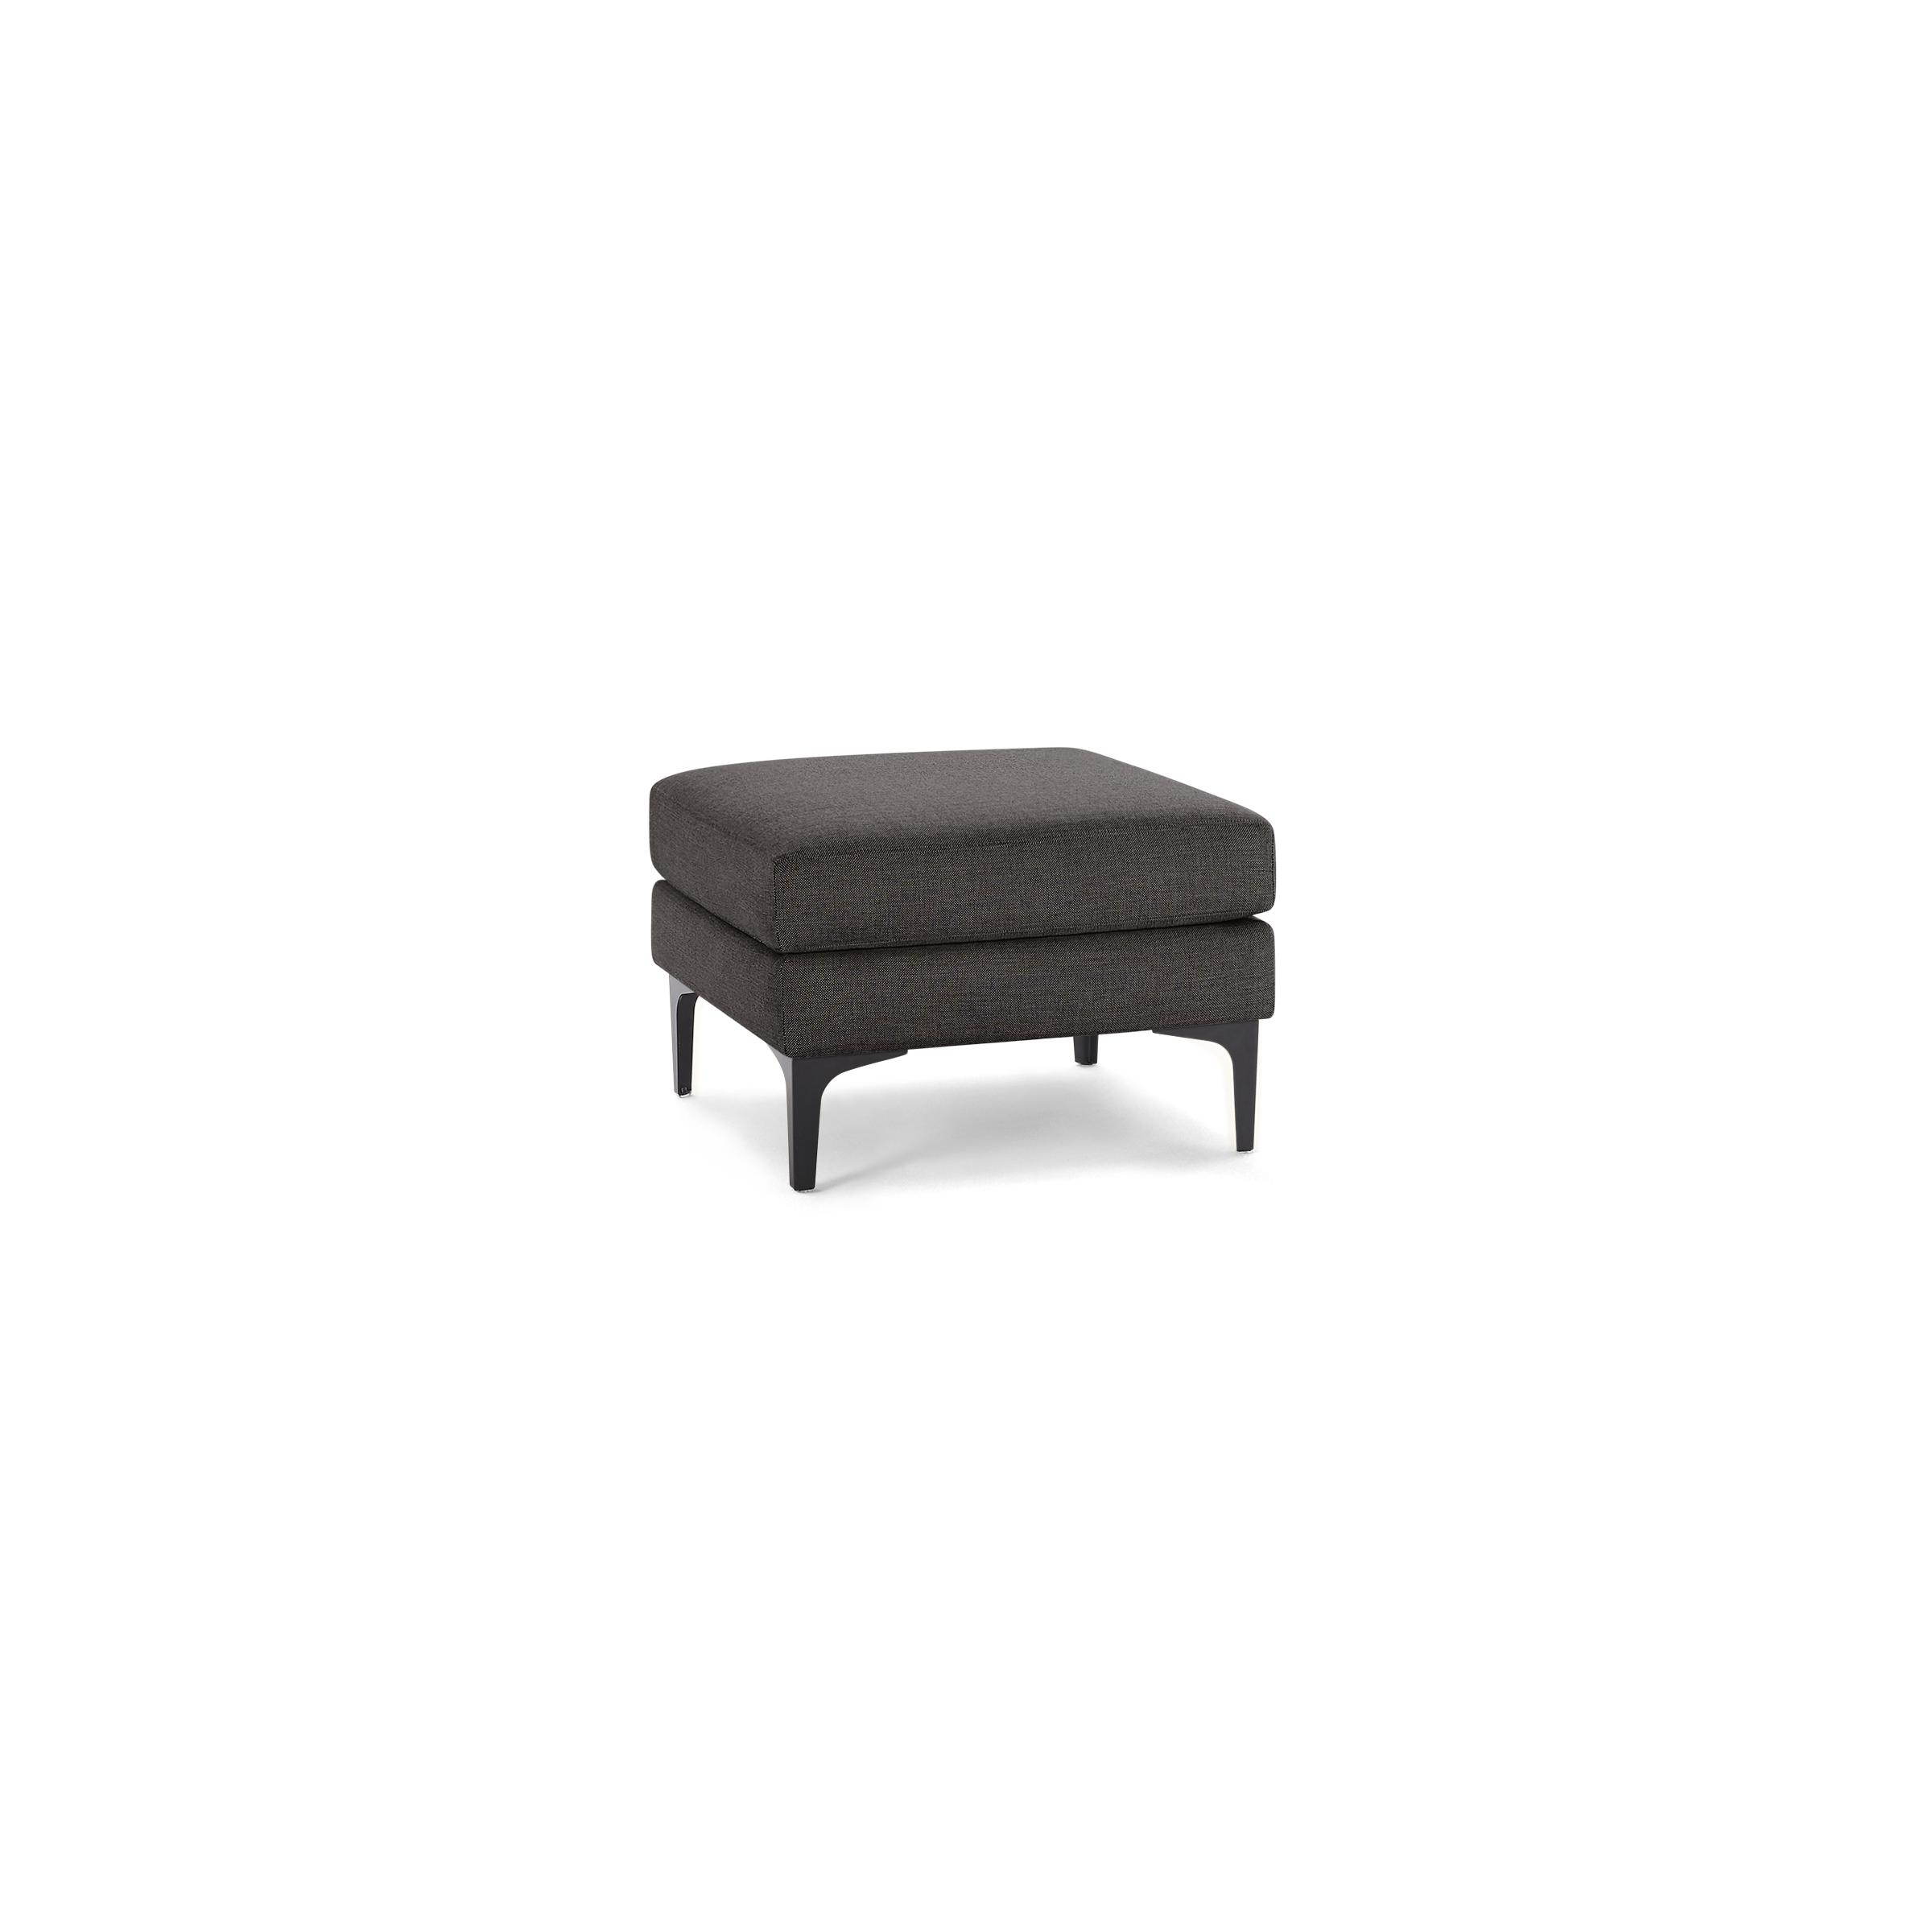 Nomad Ottoman in Charcoal, Black Metal Legs - Image 0